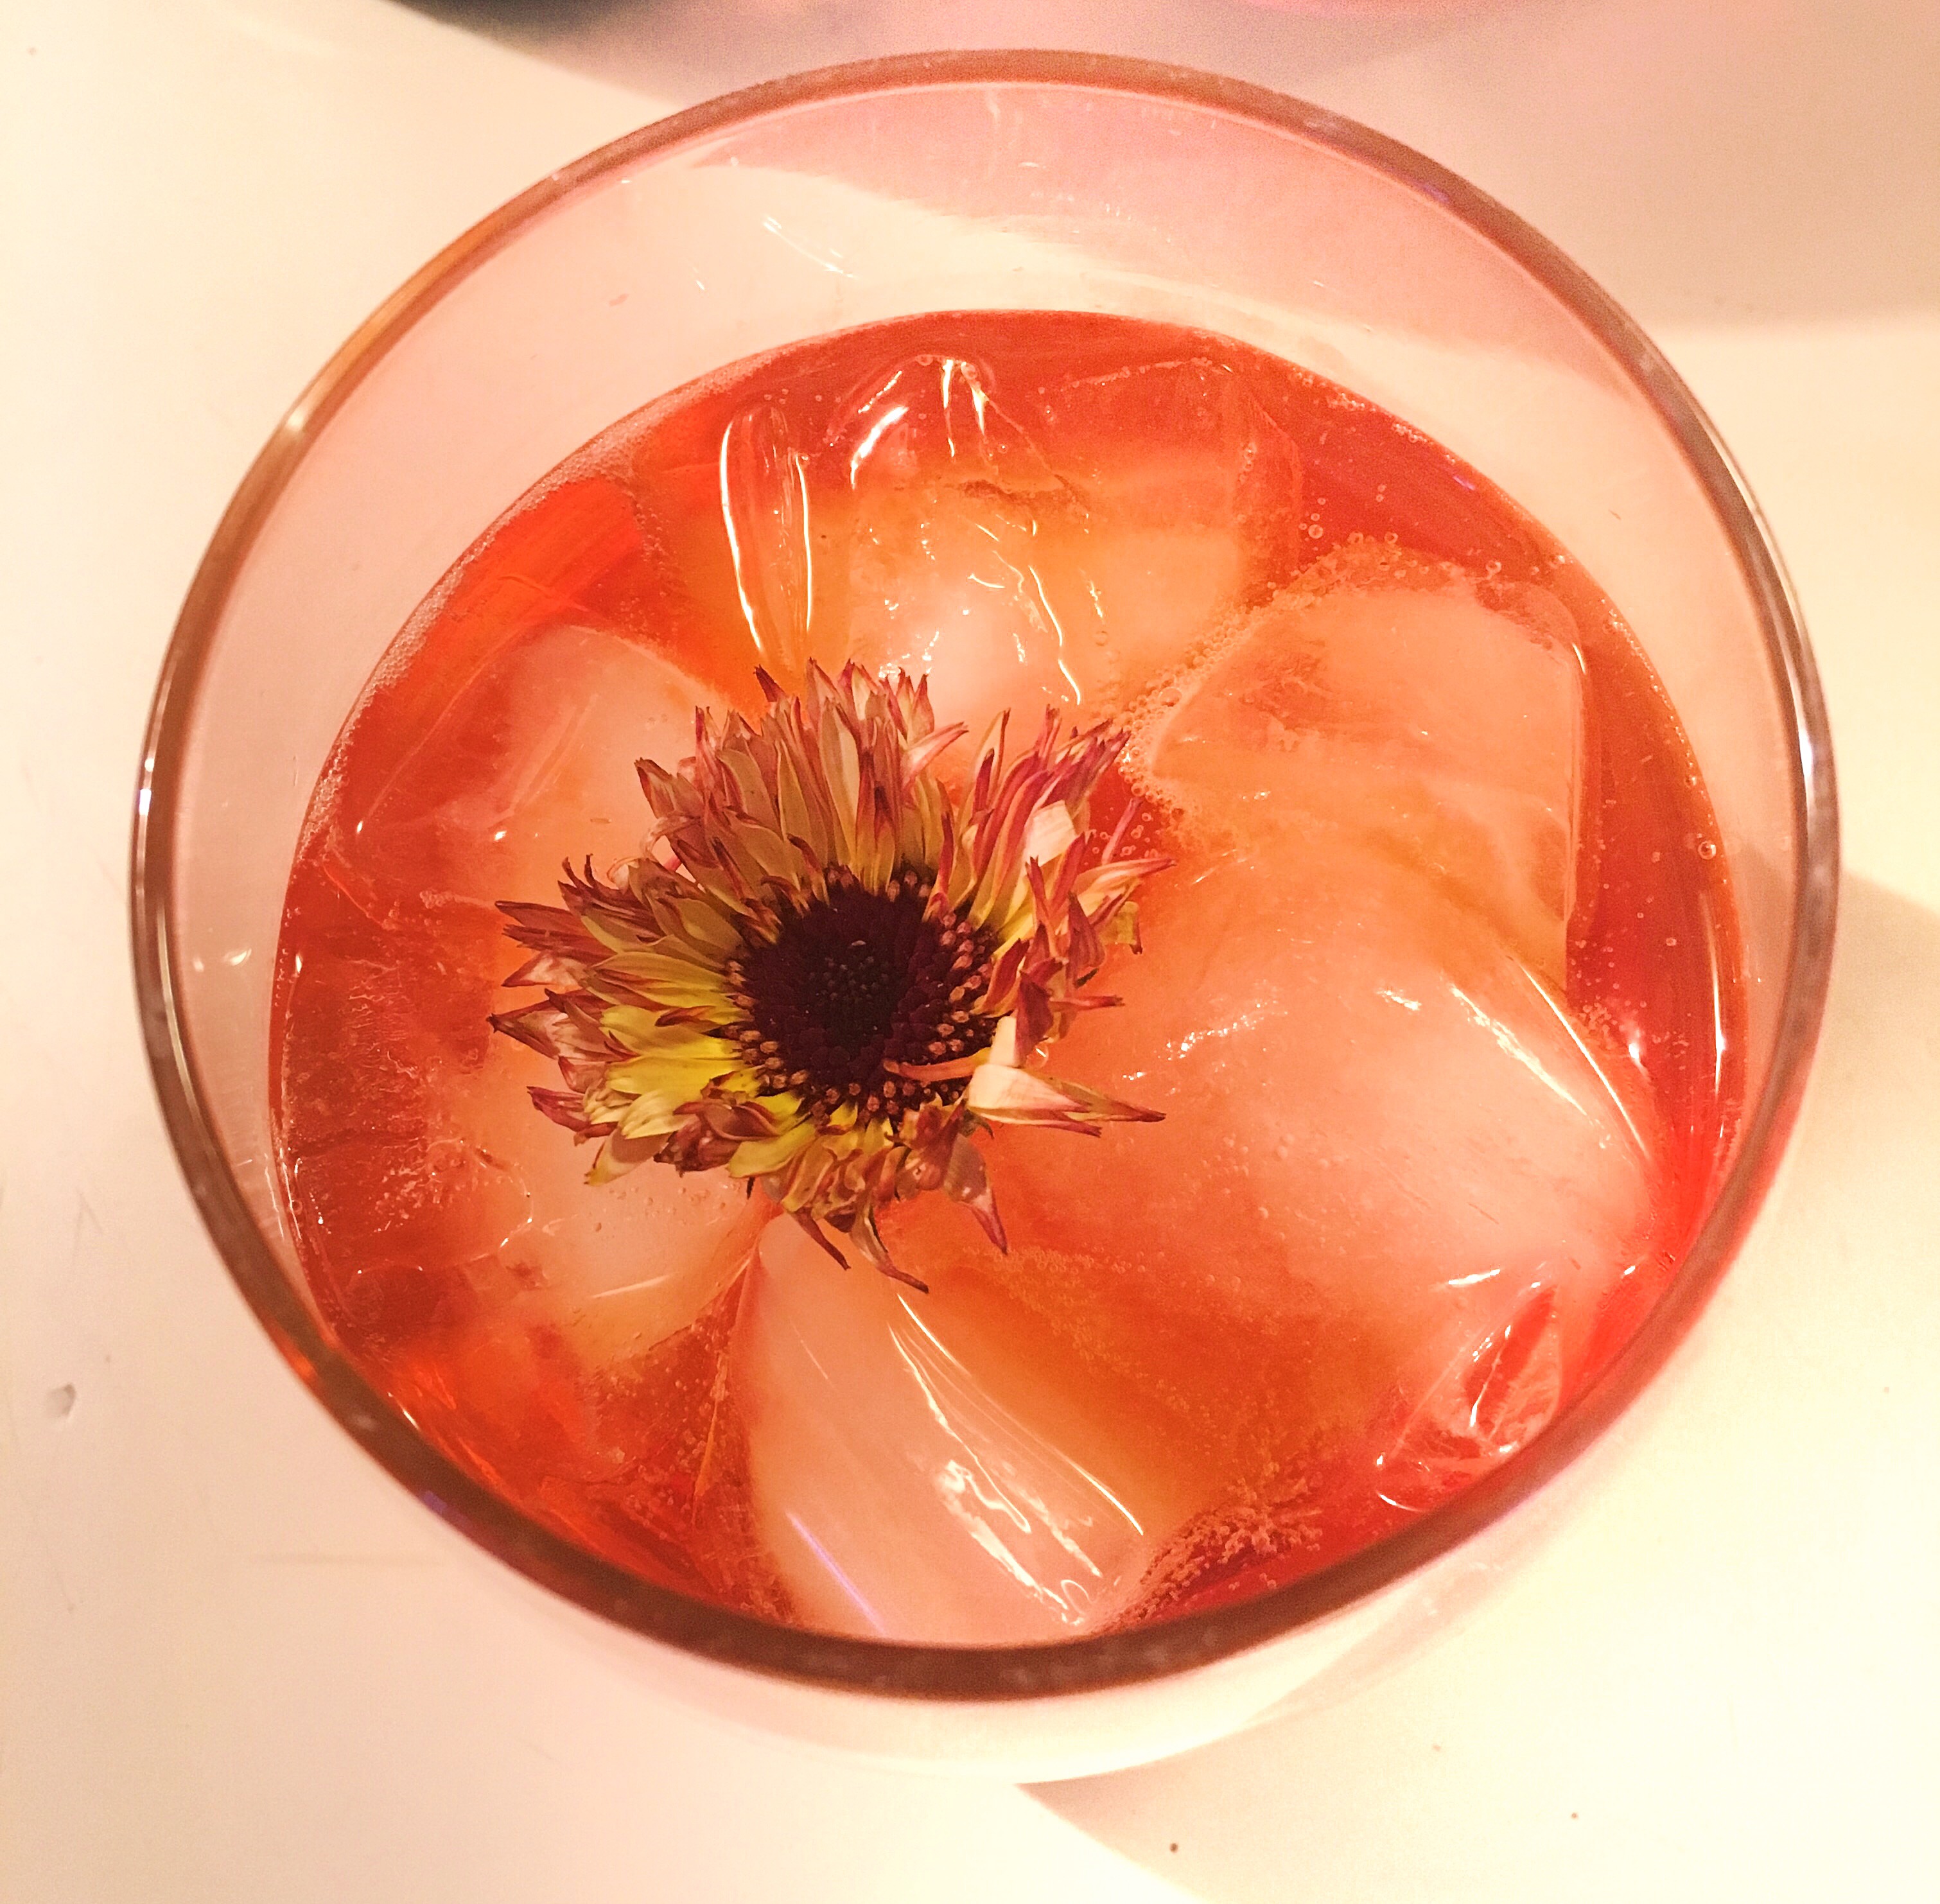 A Floral Summer Spritz: Cheers to edible flowers in and on our drinks